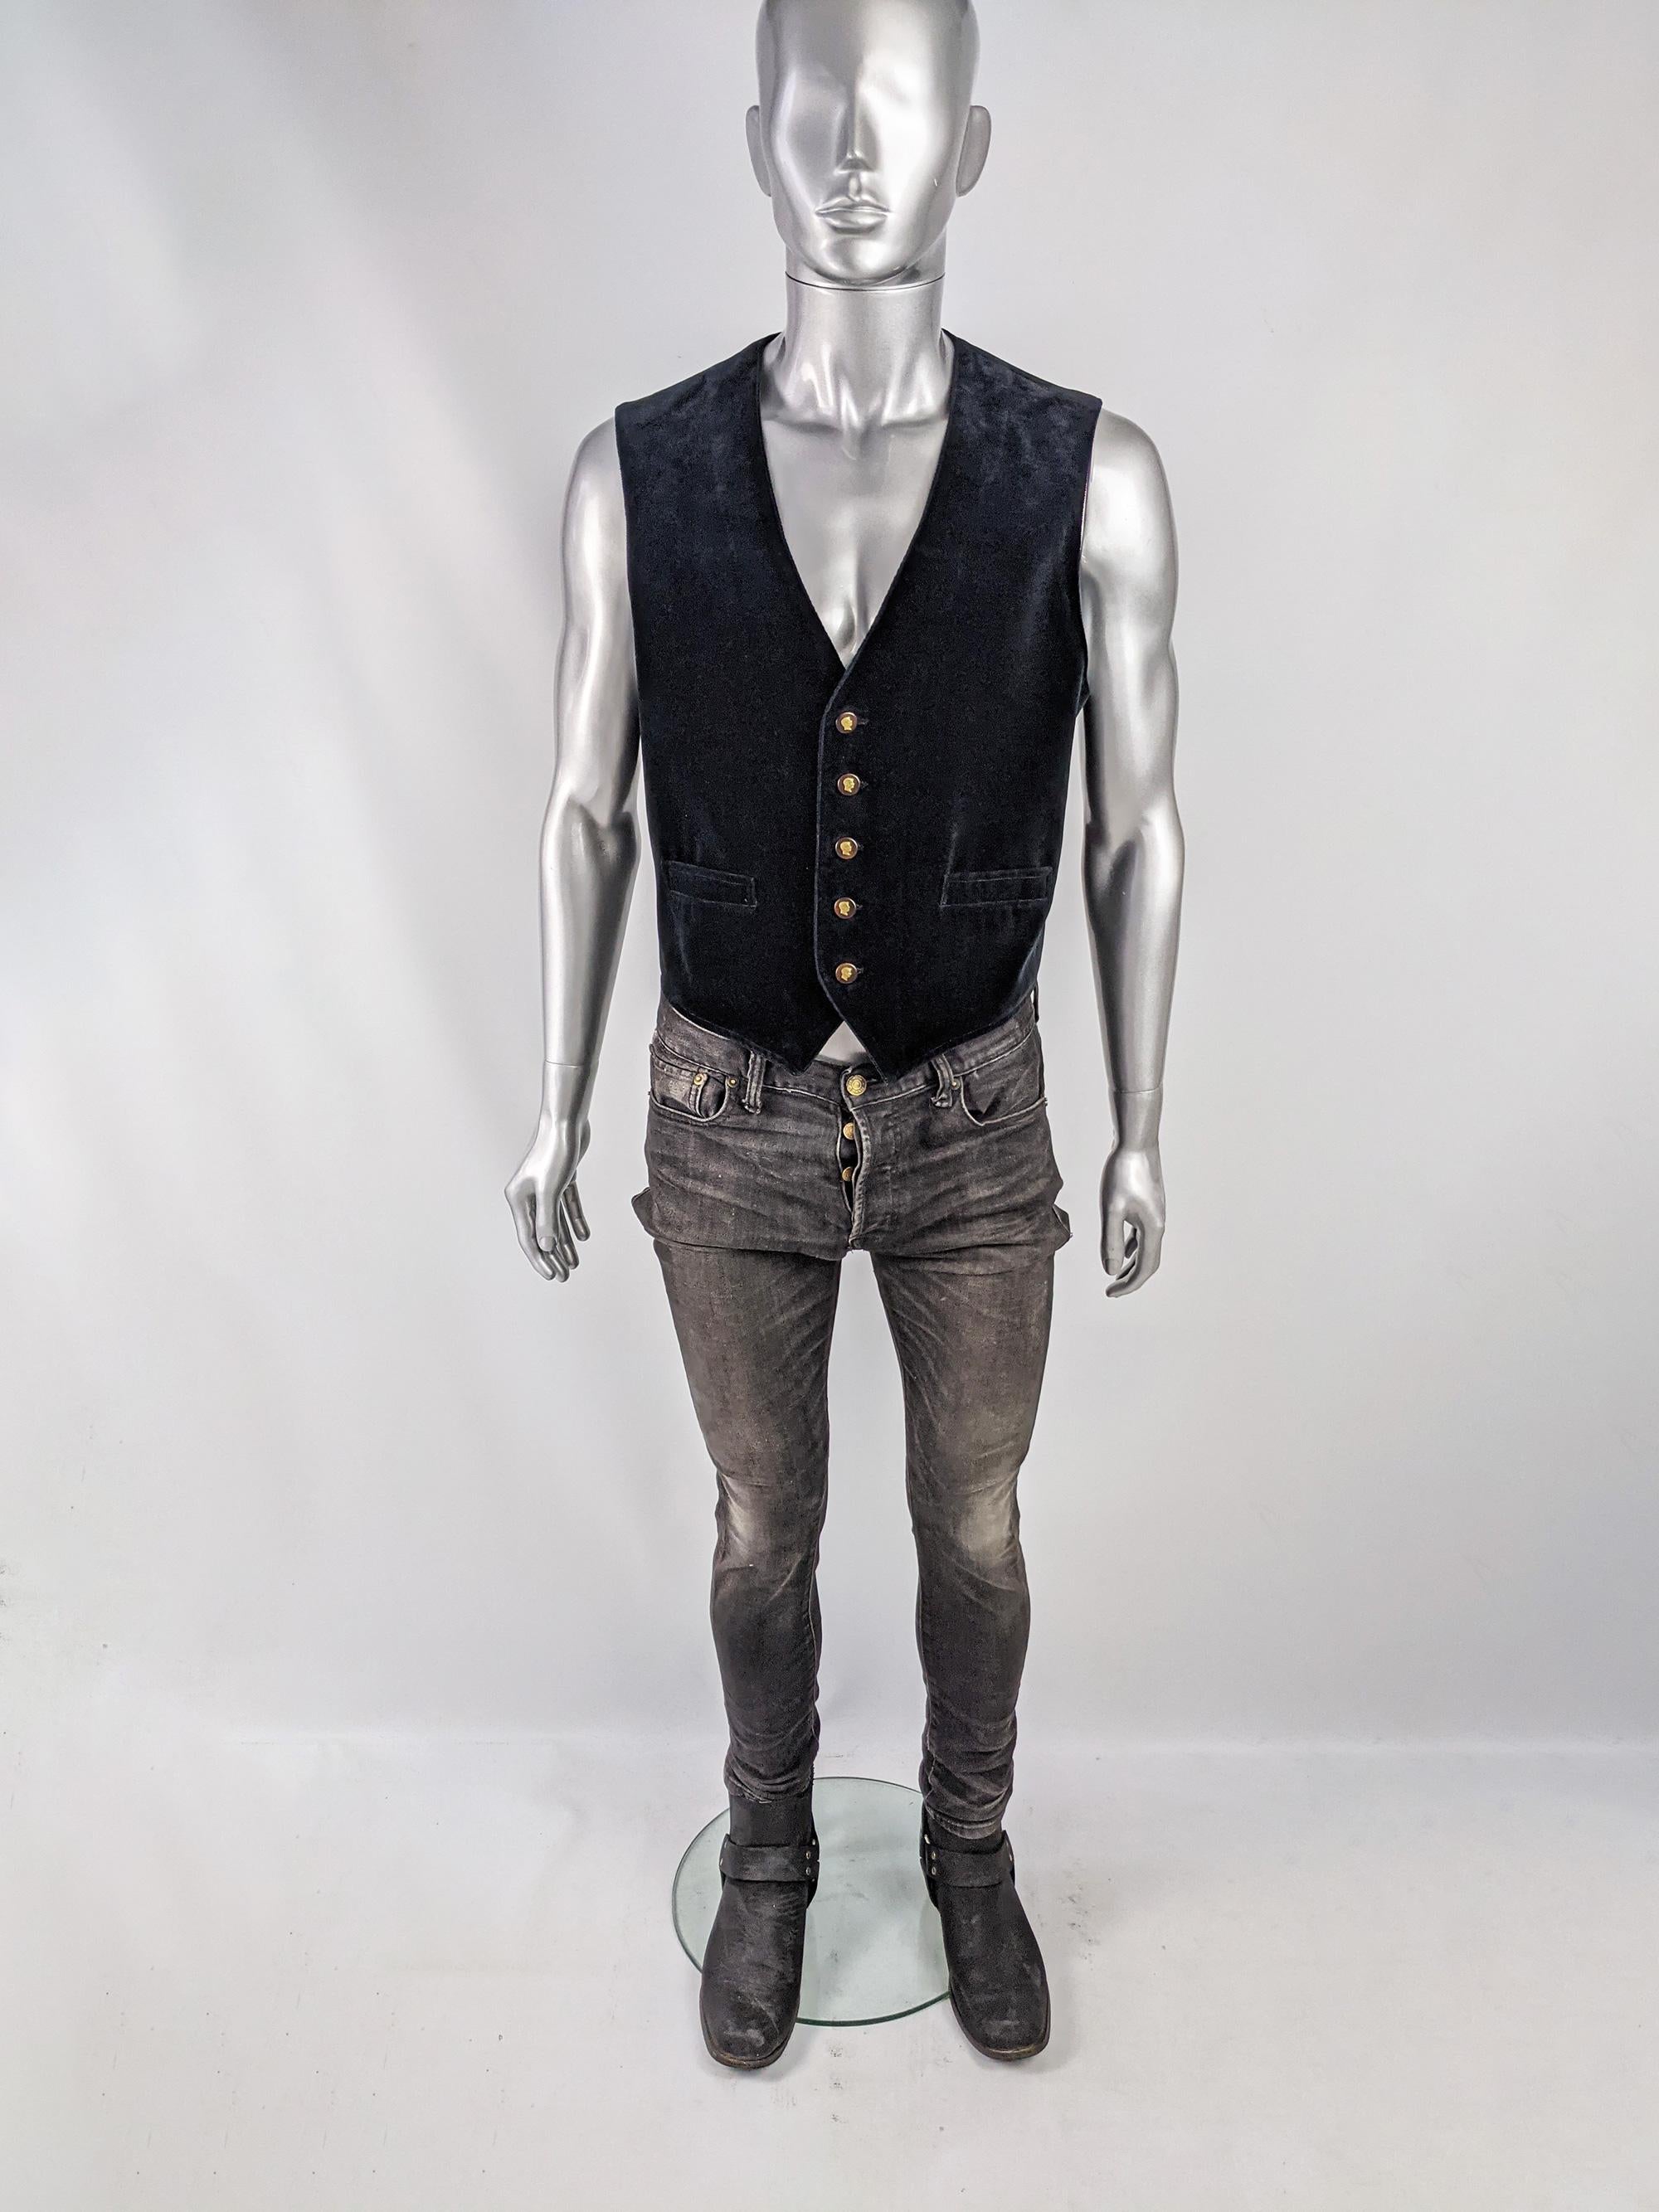 A stylish and understated vintage mens Moschino waistcoat from the 80s for his early menswear line, 'Uomo'. In a classic black velvet with buttons embellished with Franco Moschino's cameo adding a touch of the whimsy that he was known for. Perfect